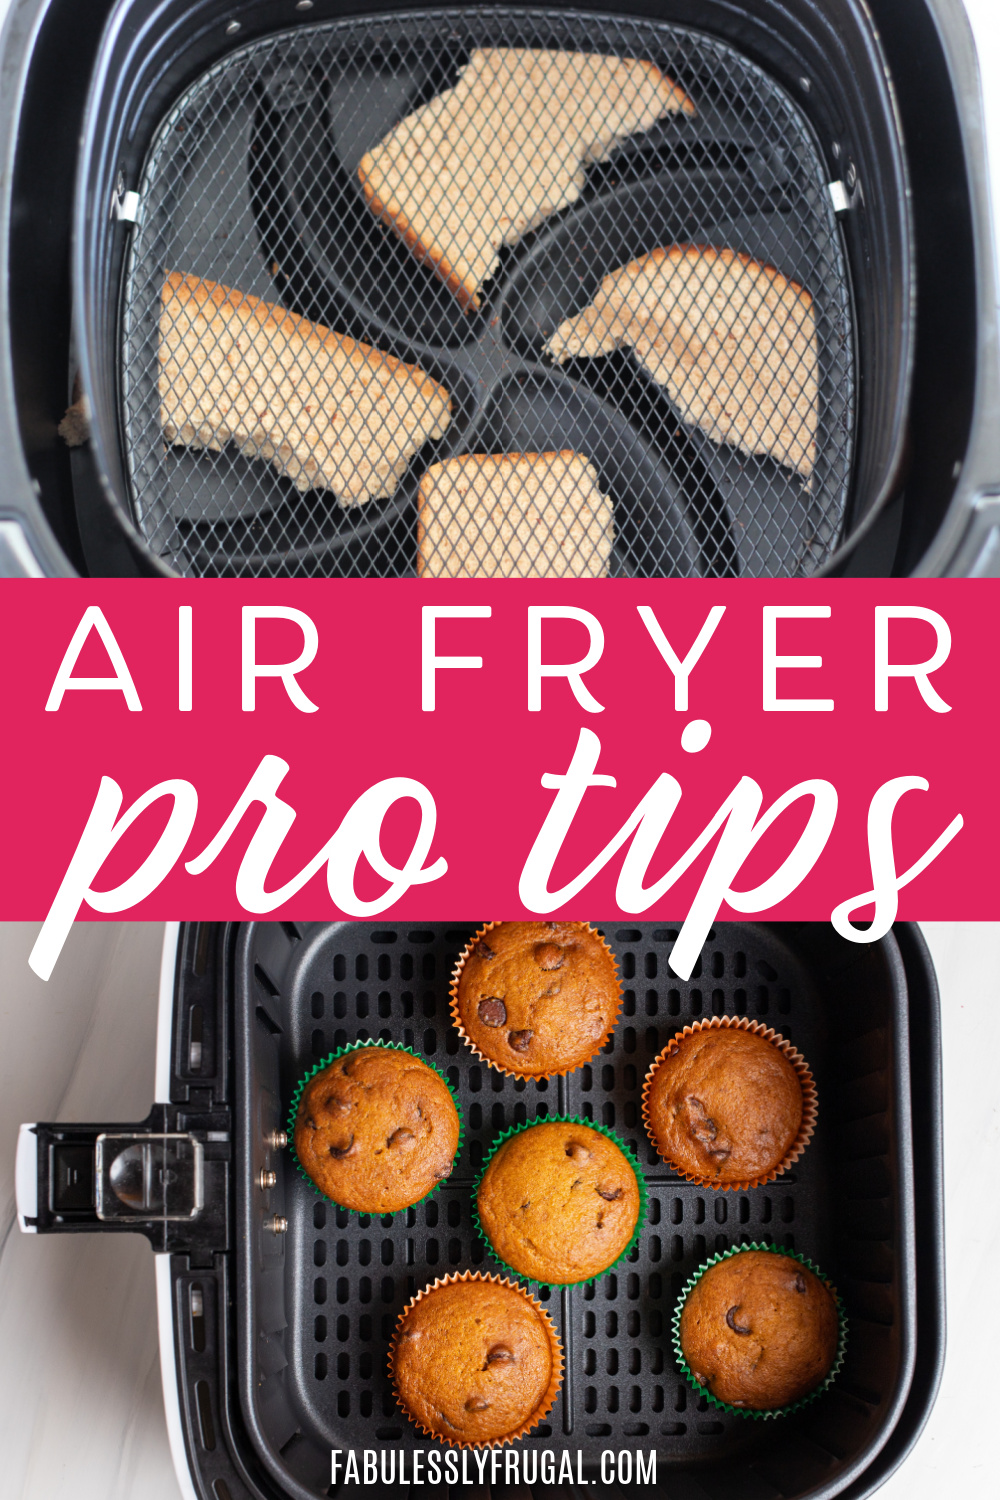 Best 2022 Air Fryer Review and Buying Guide - Fabulessly Frugal